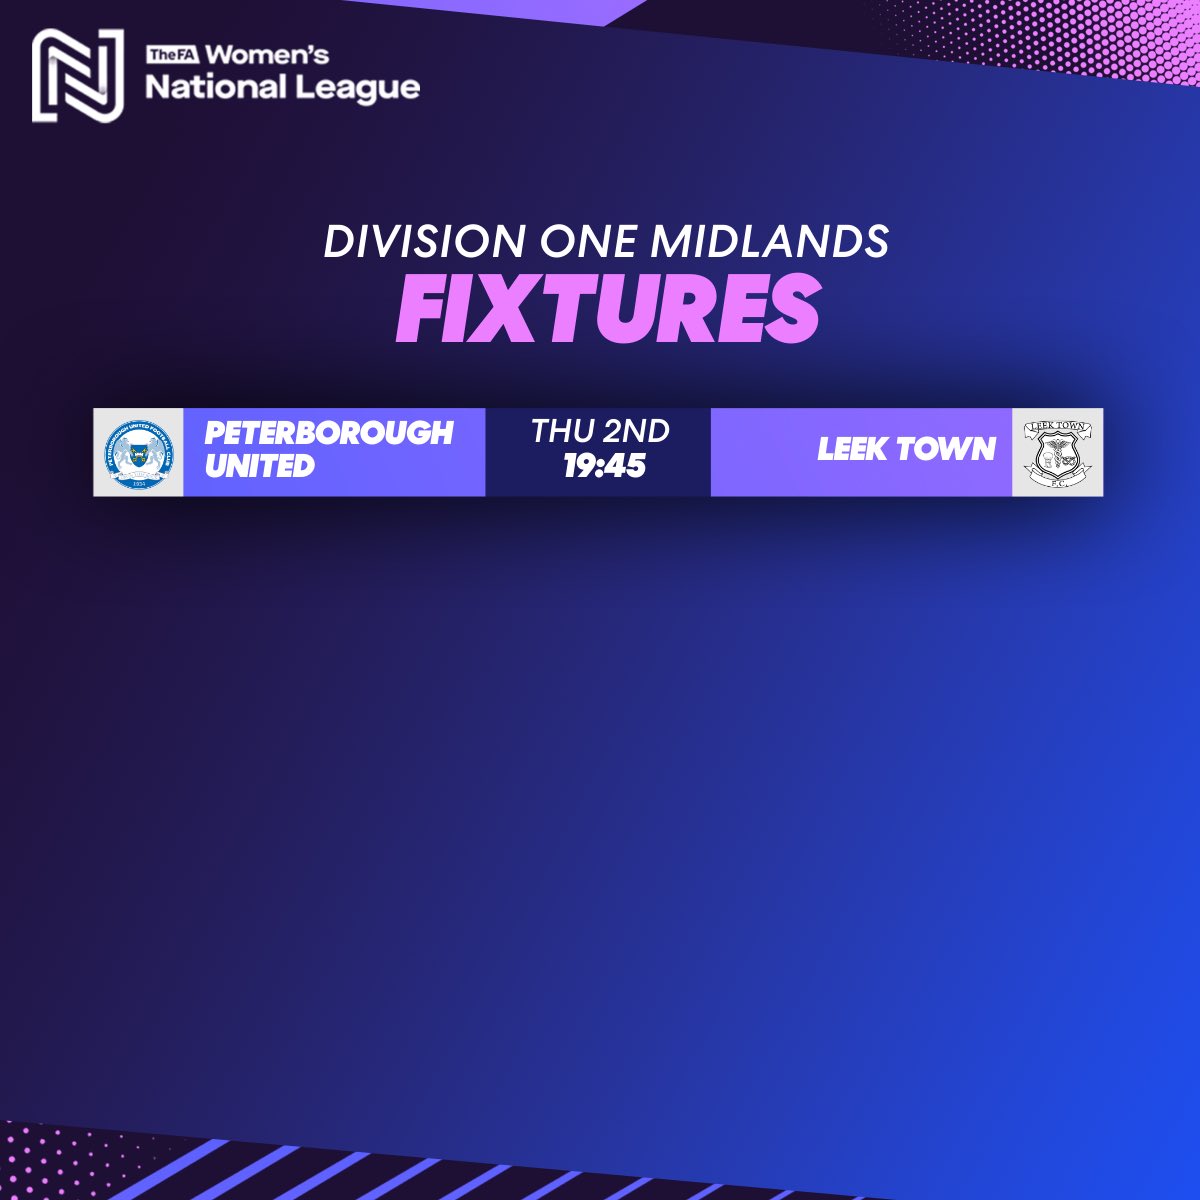 Next up ⏩

A Thursday night bout between Peterborough United and Leek Town 👇

#FAWNL